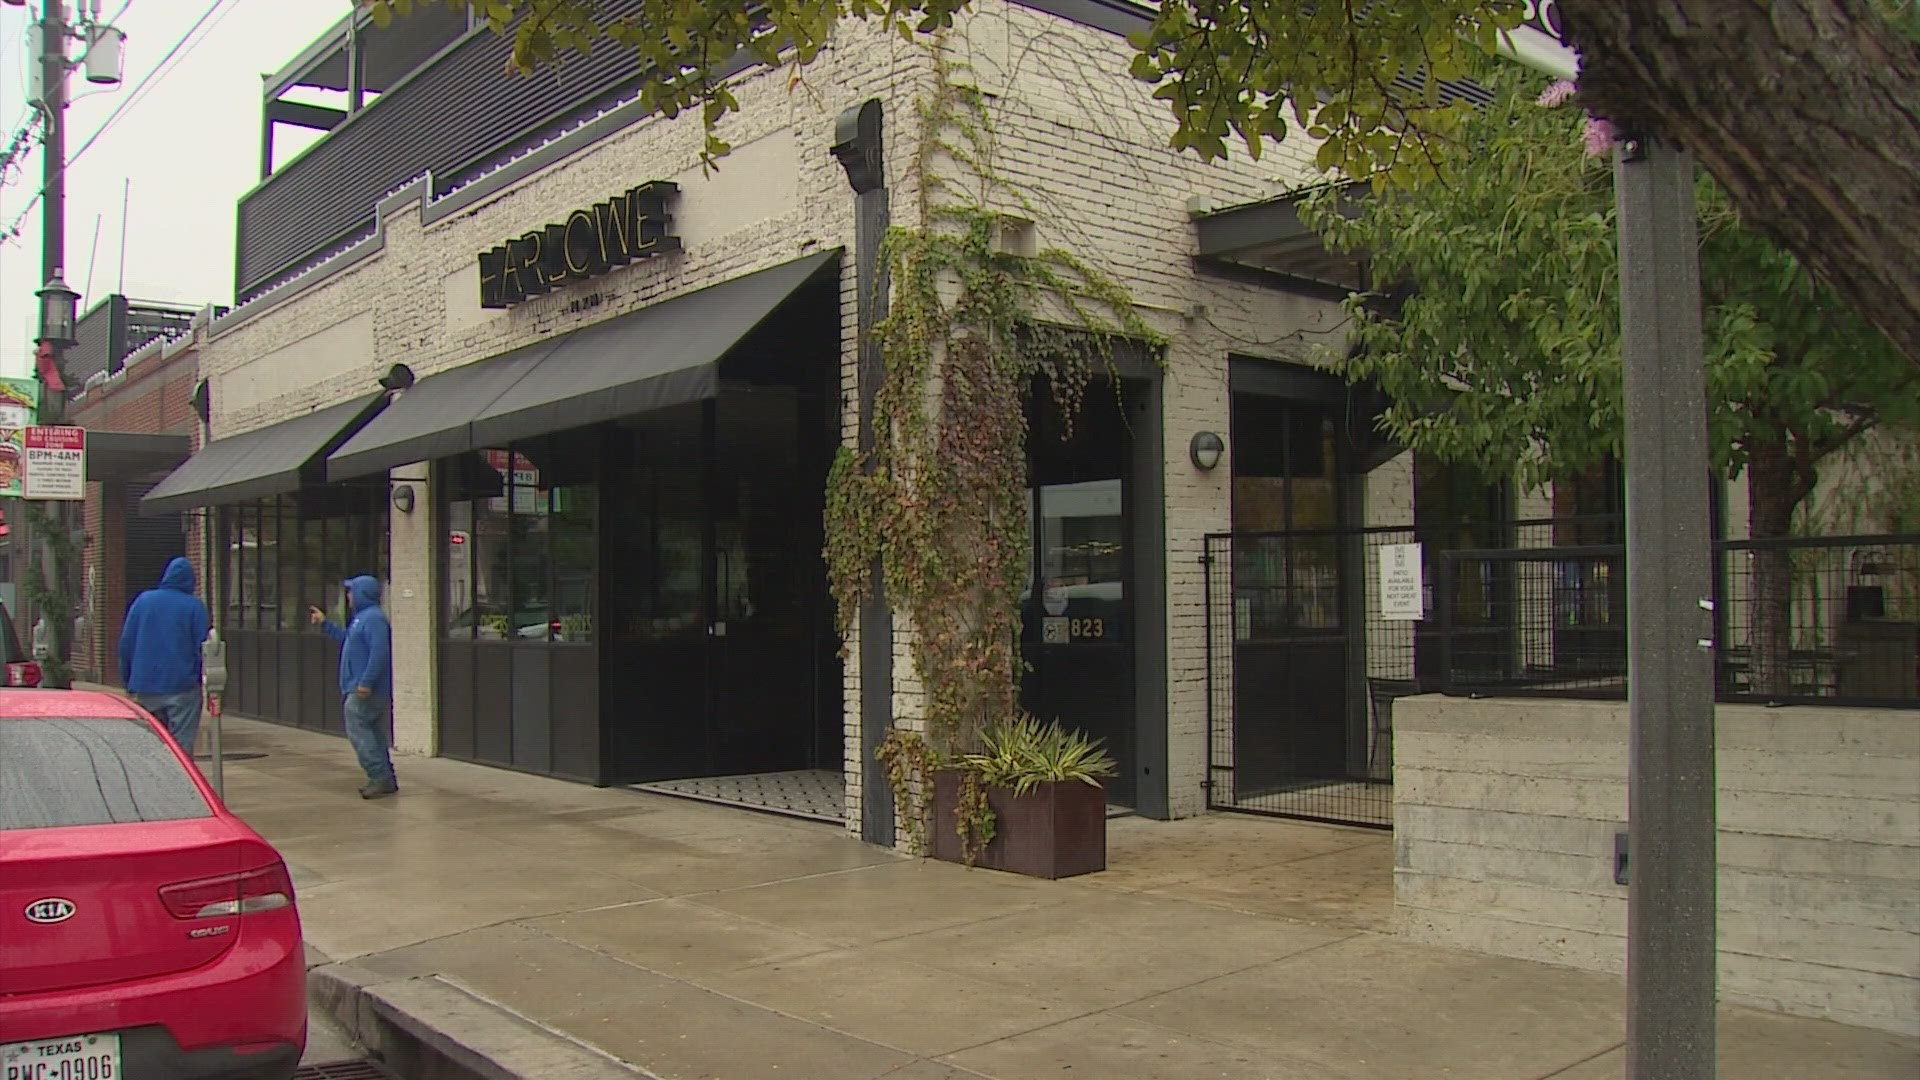 Two women claimed they were drugged by a bartender at Harlowe in Dallas' Deep Ellum neighborhood.